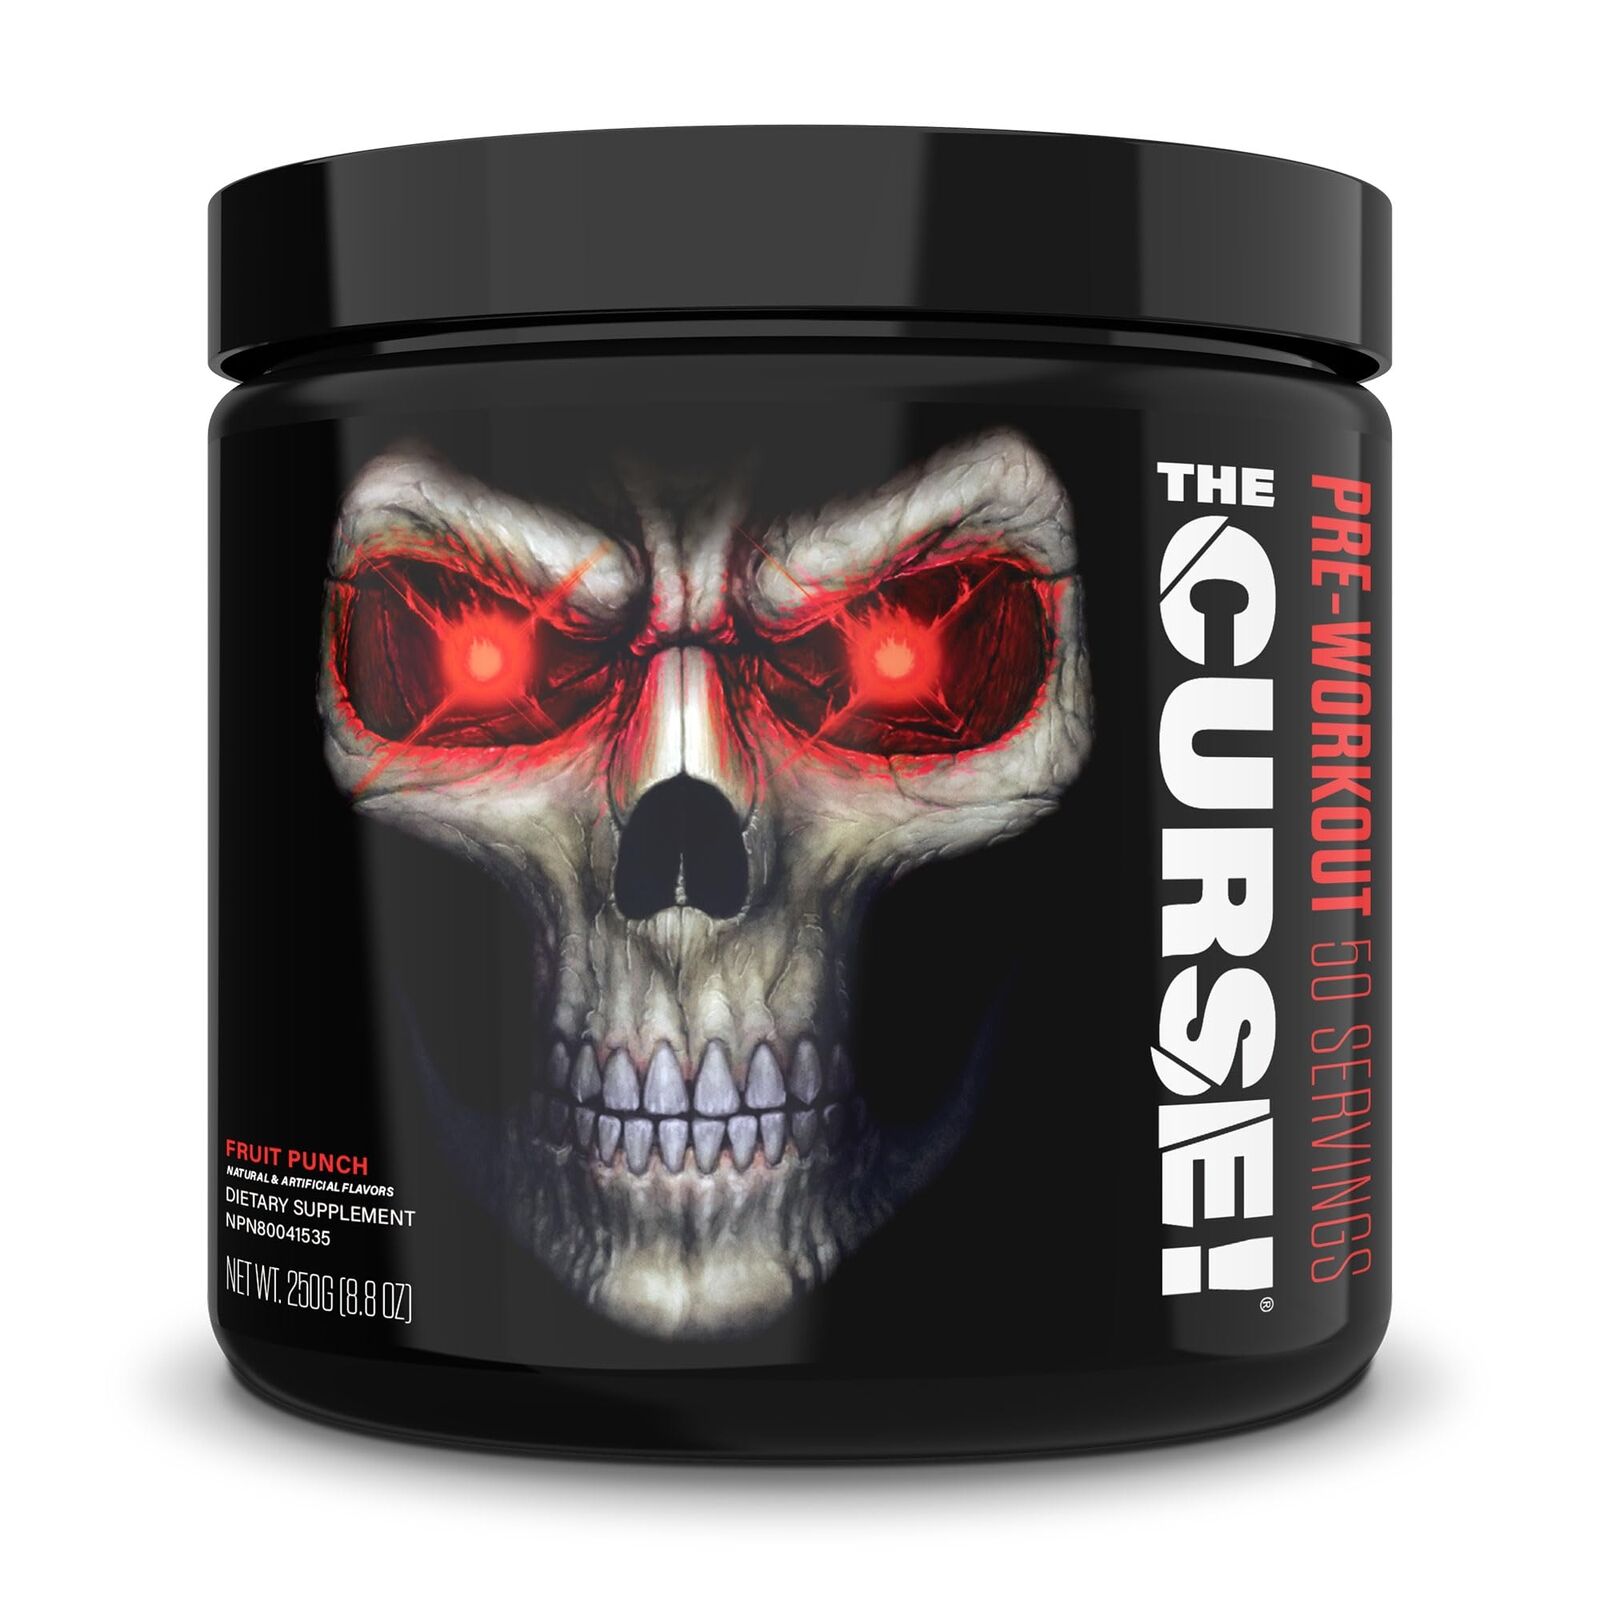 Supliment Alimentar The Curse Fruit Punch 50 fiecare, marca Jnx Sports